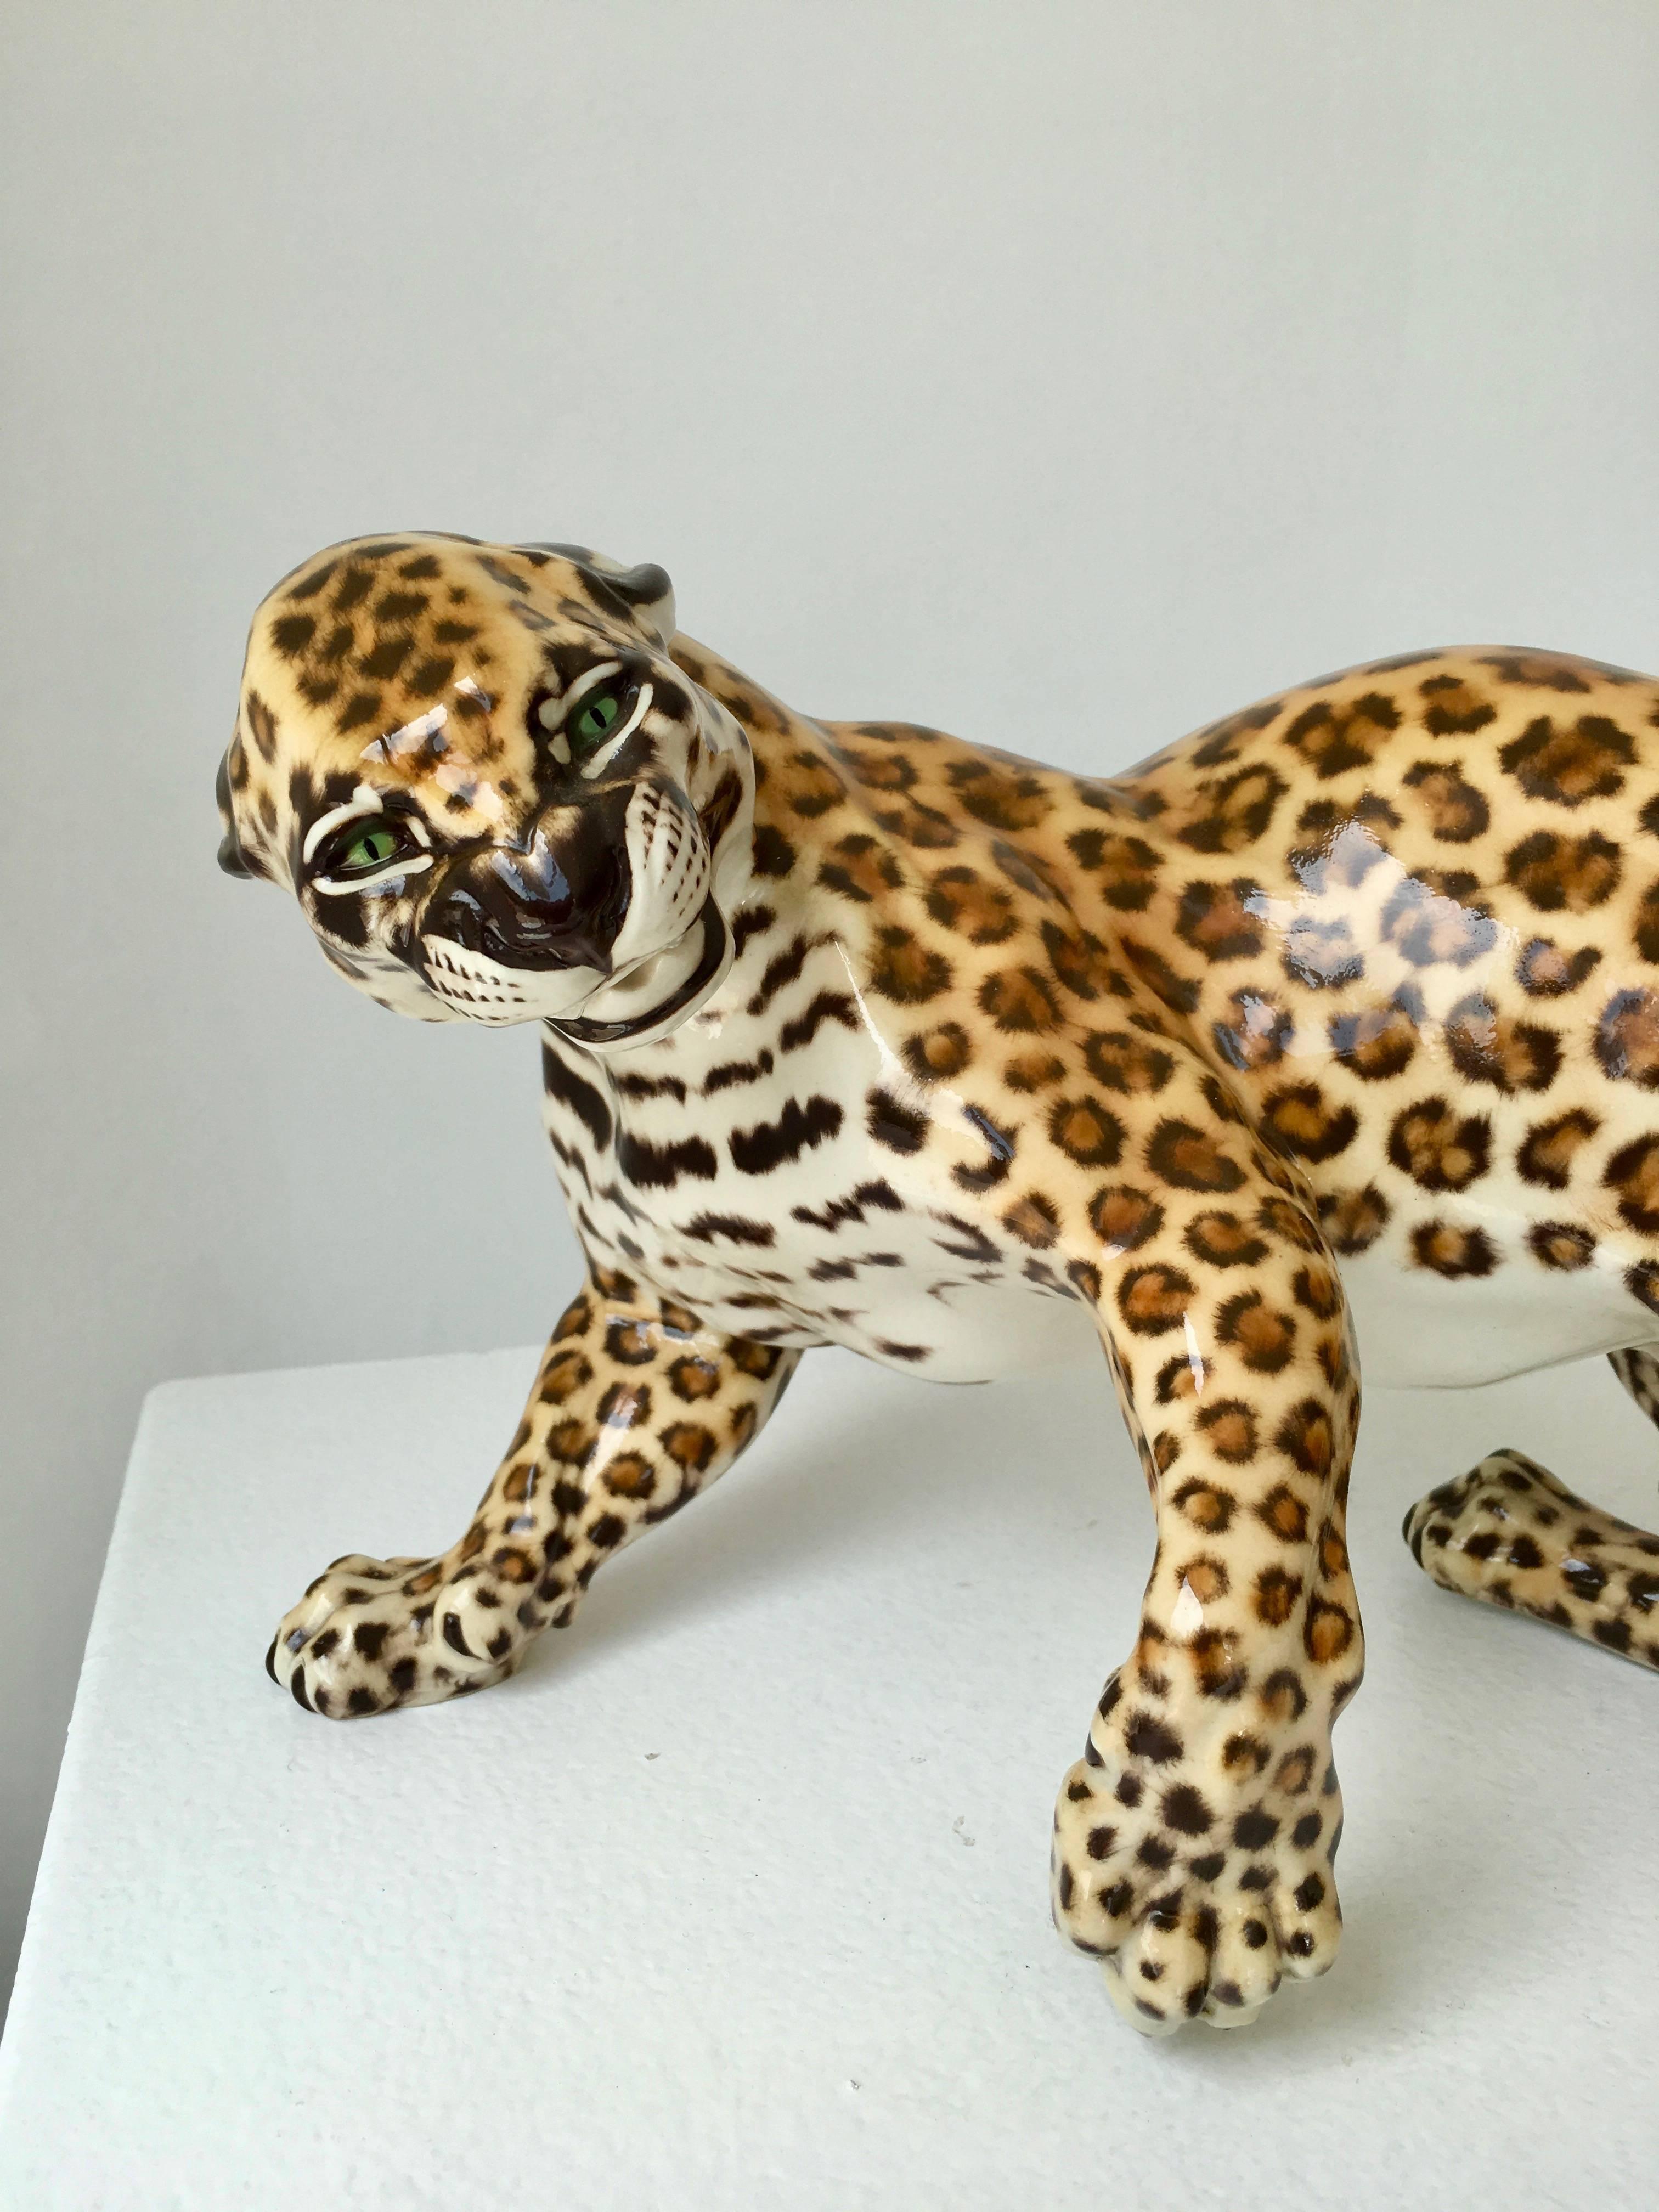 The leopard Zola from a series of Art Nouveau fine porcelain figurines modeled by Hans Behrens in 1904 for Porzellan Manufaktur Nymphenburg. In production since 1904, this lifelike piece dates to the 1960s.

Nymphenburg was founded in 1747 as the